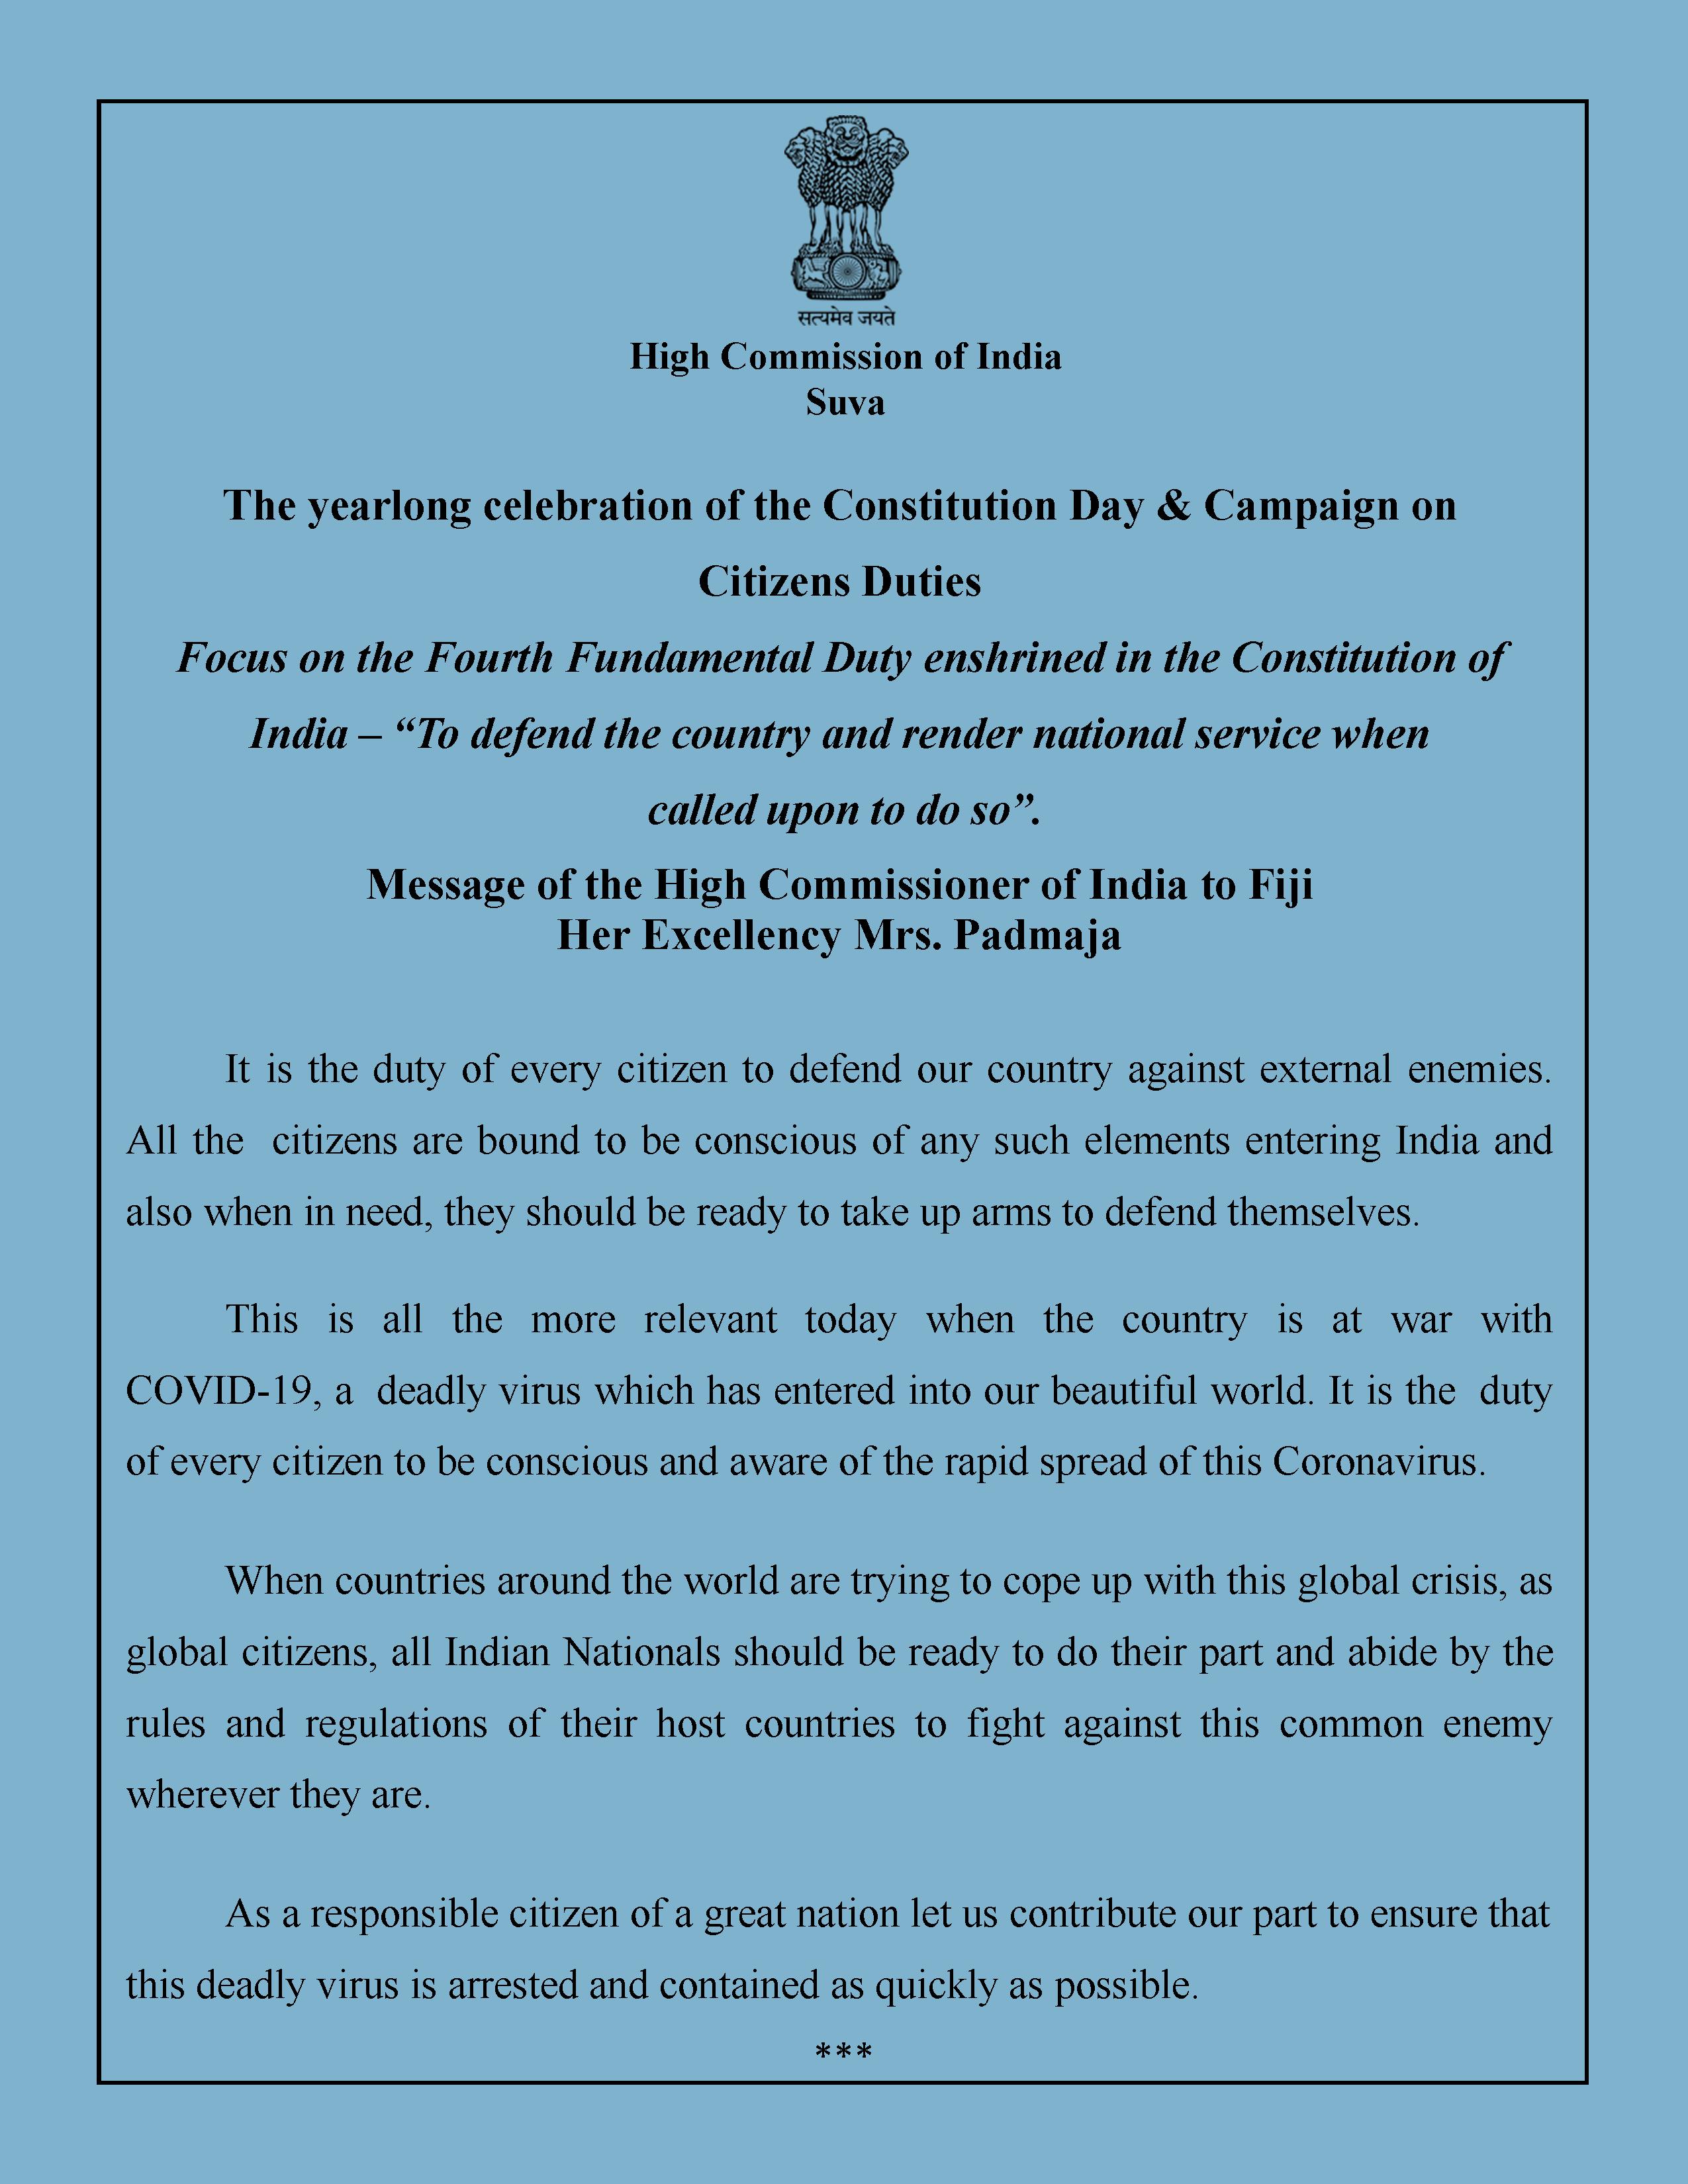 Message of the High Commissioner in connection with Constitution Day & Campaign on Citizens Duties